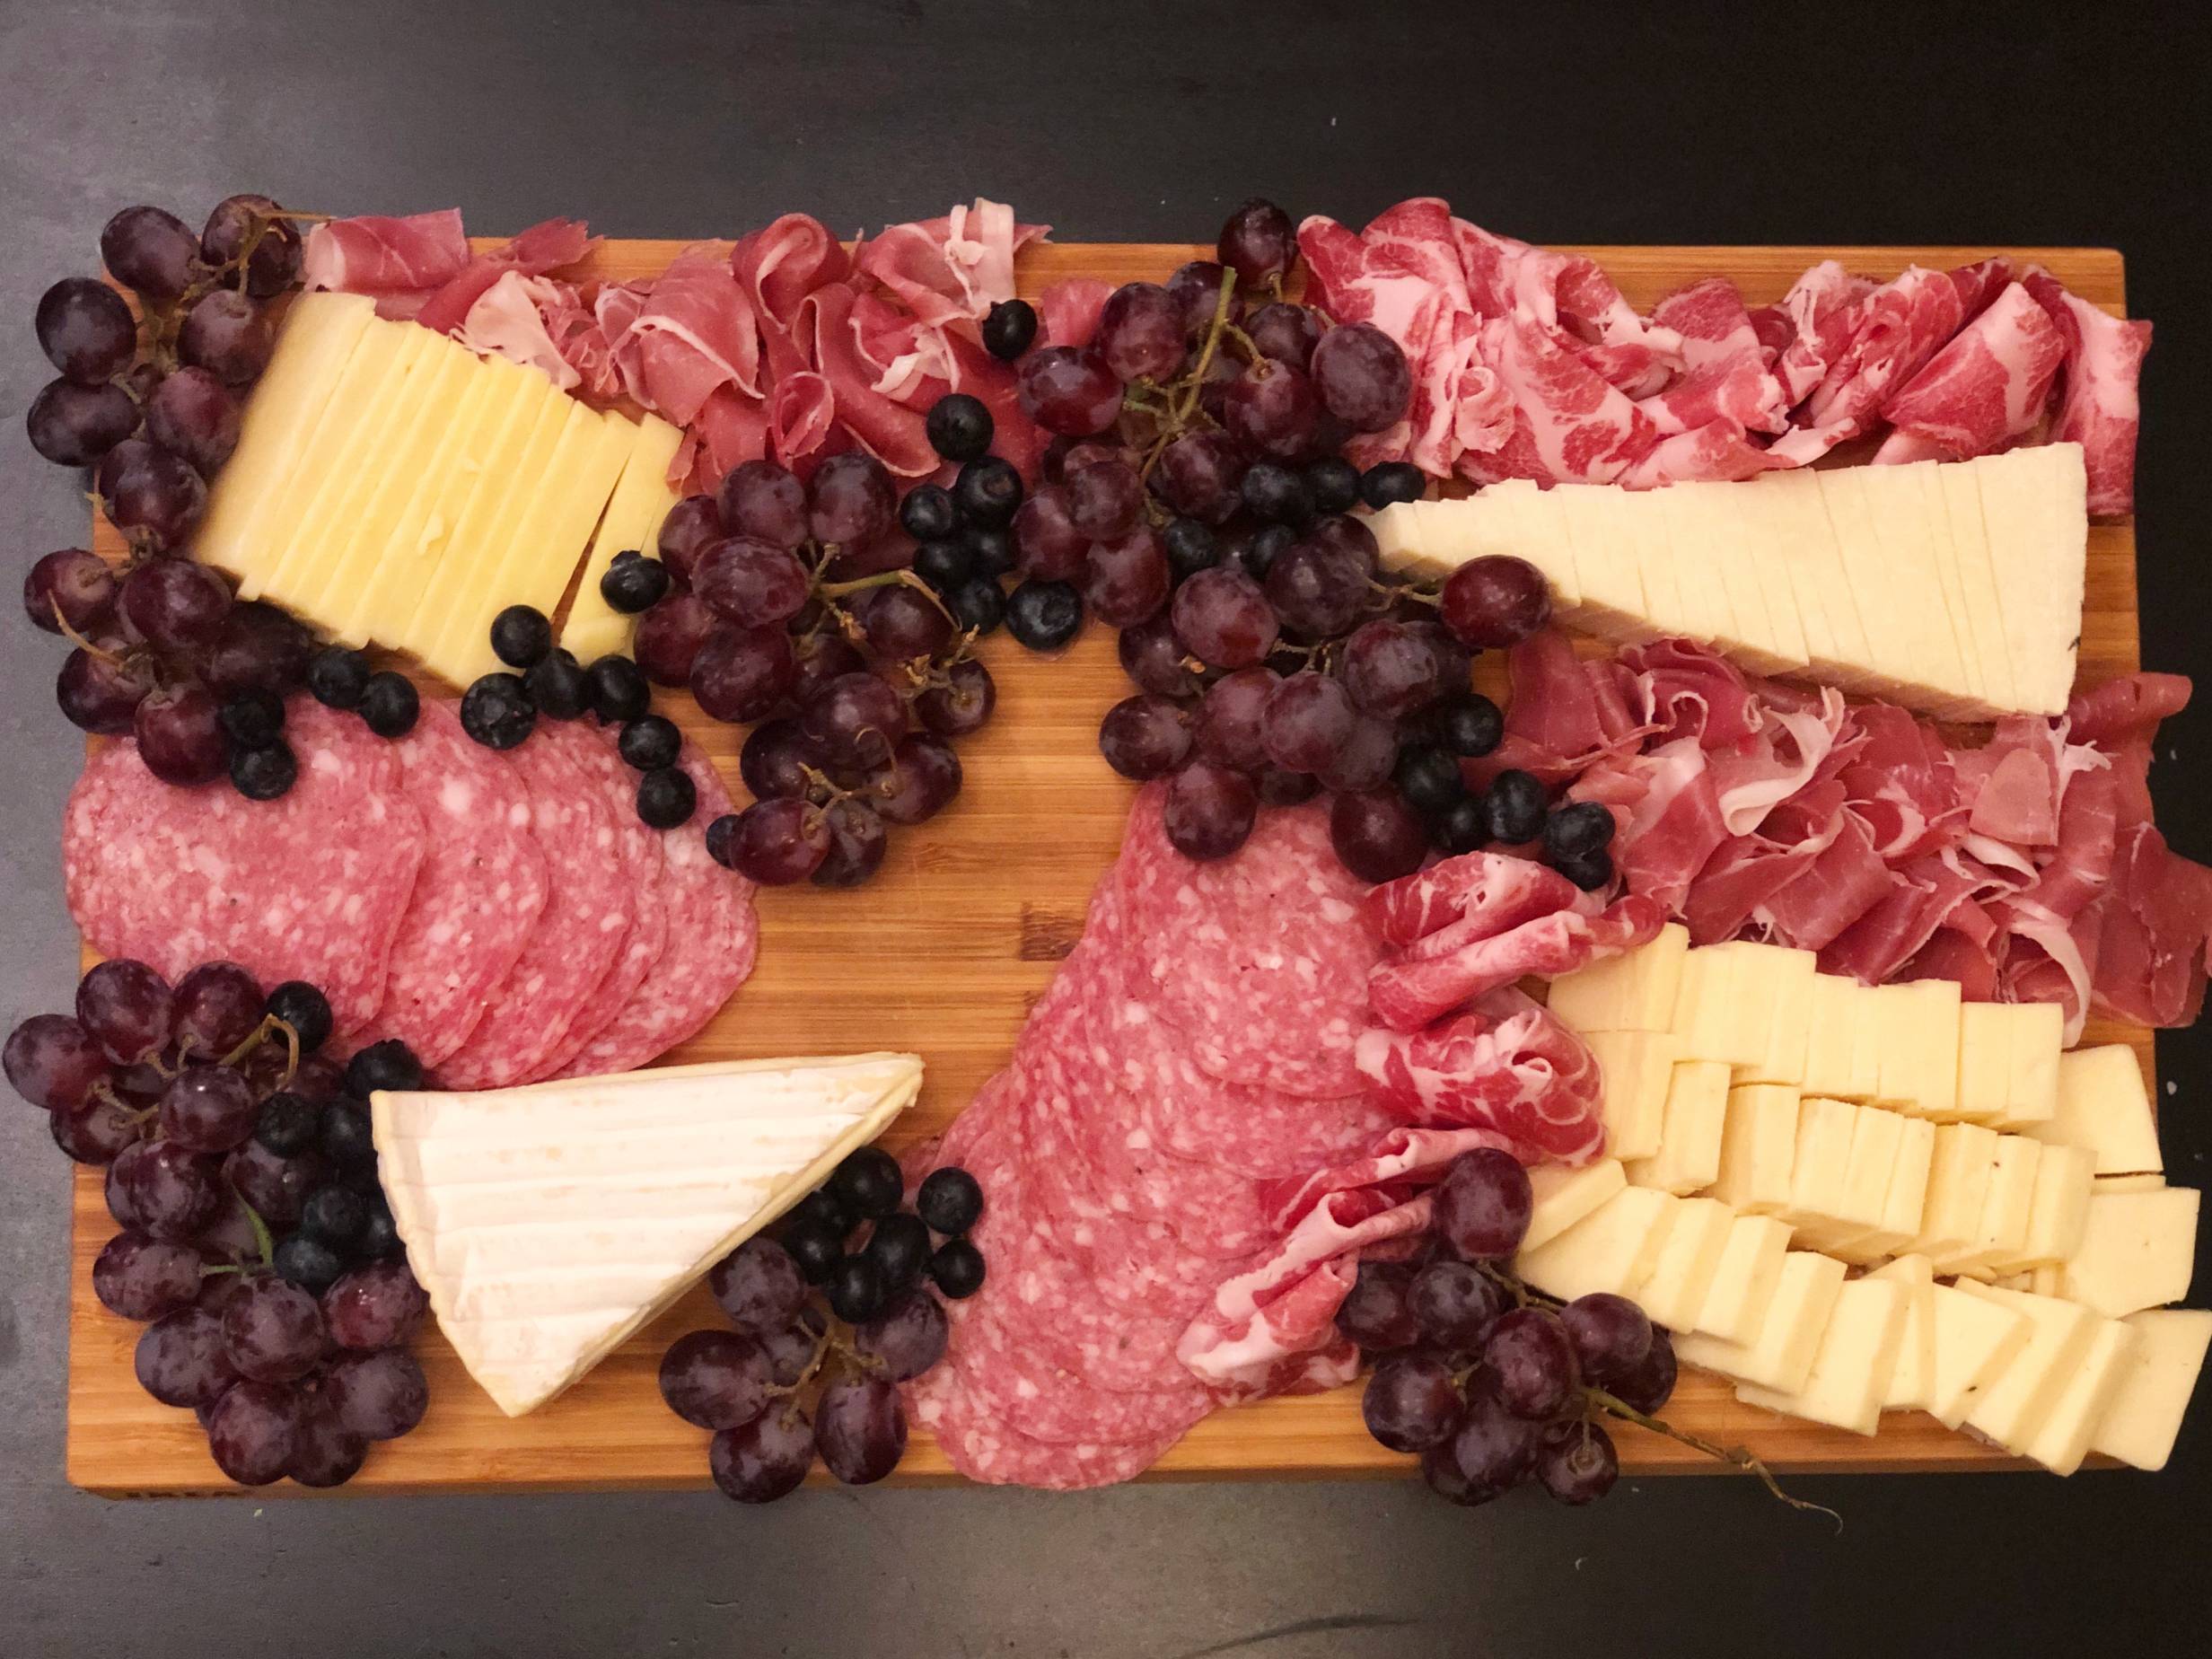 A wooden cutting board with meats, cheeses, and added fruits. Grapes in small clusters and small groups of blueberries are touching the cheese and meats. Photo by Alyssa Buckley.